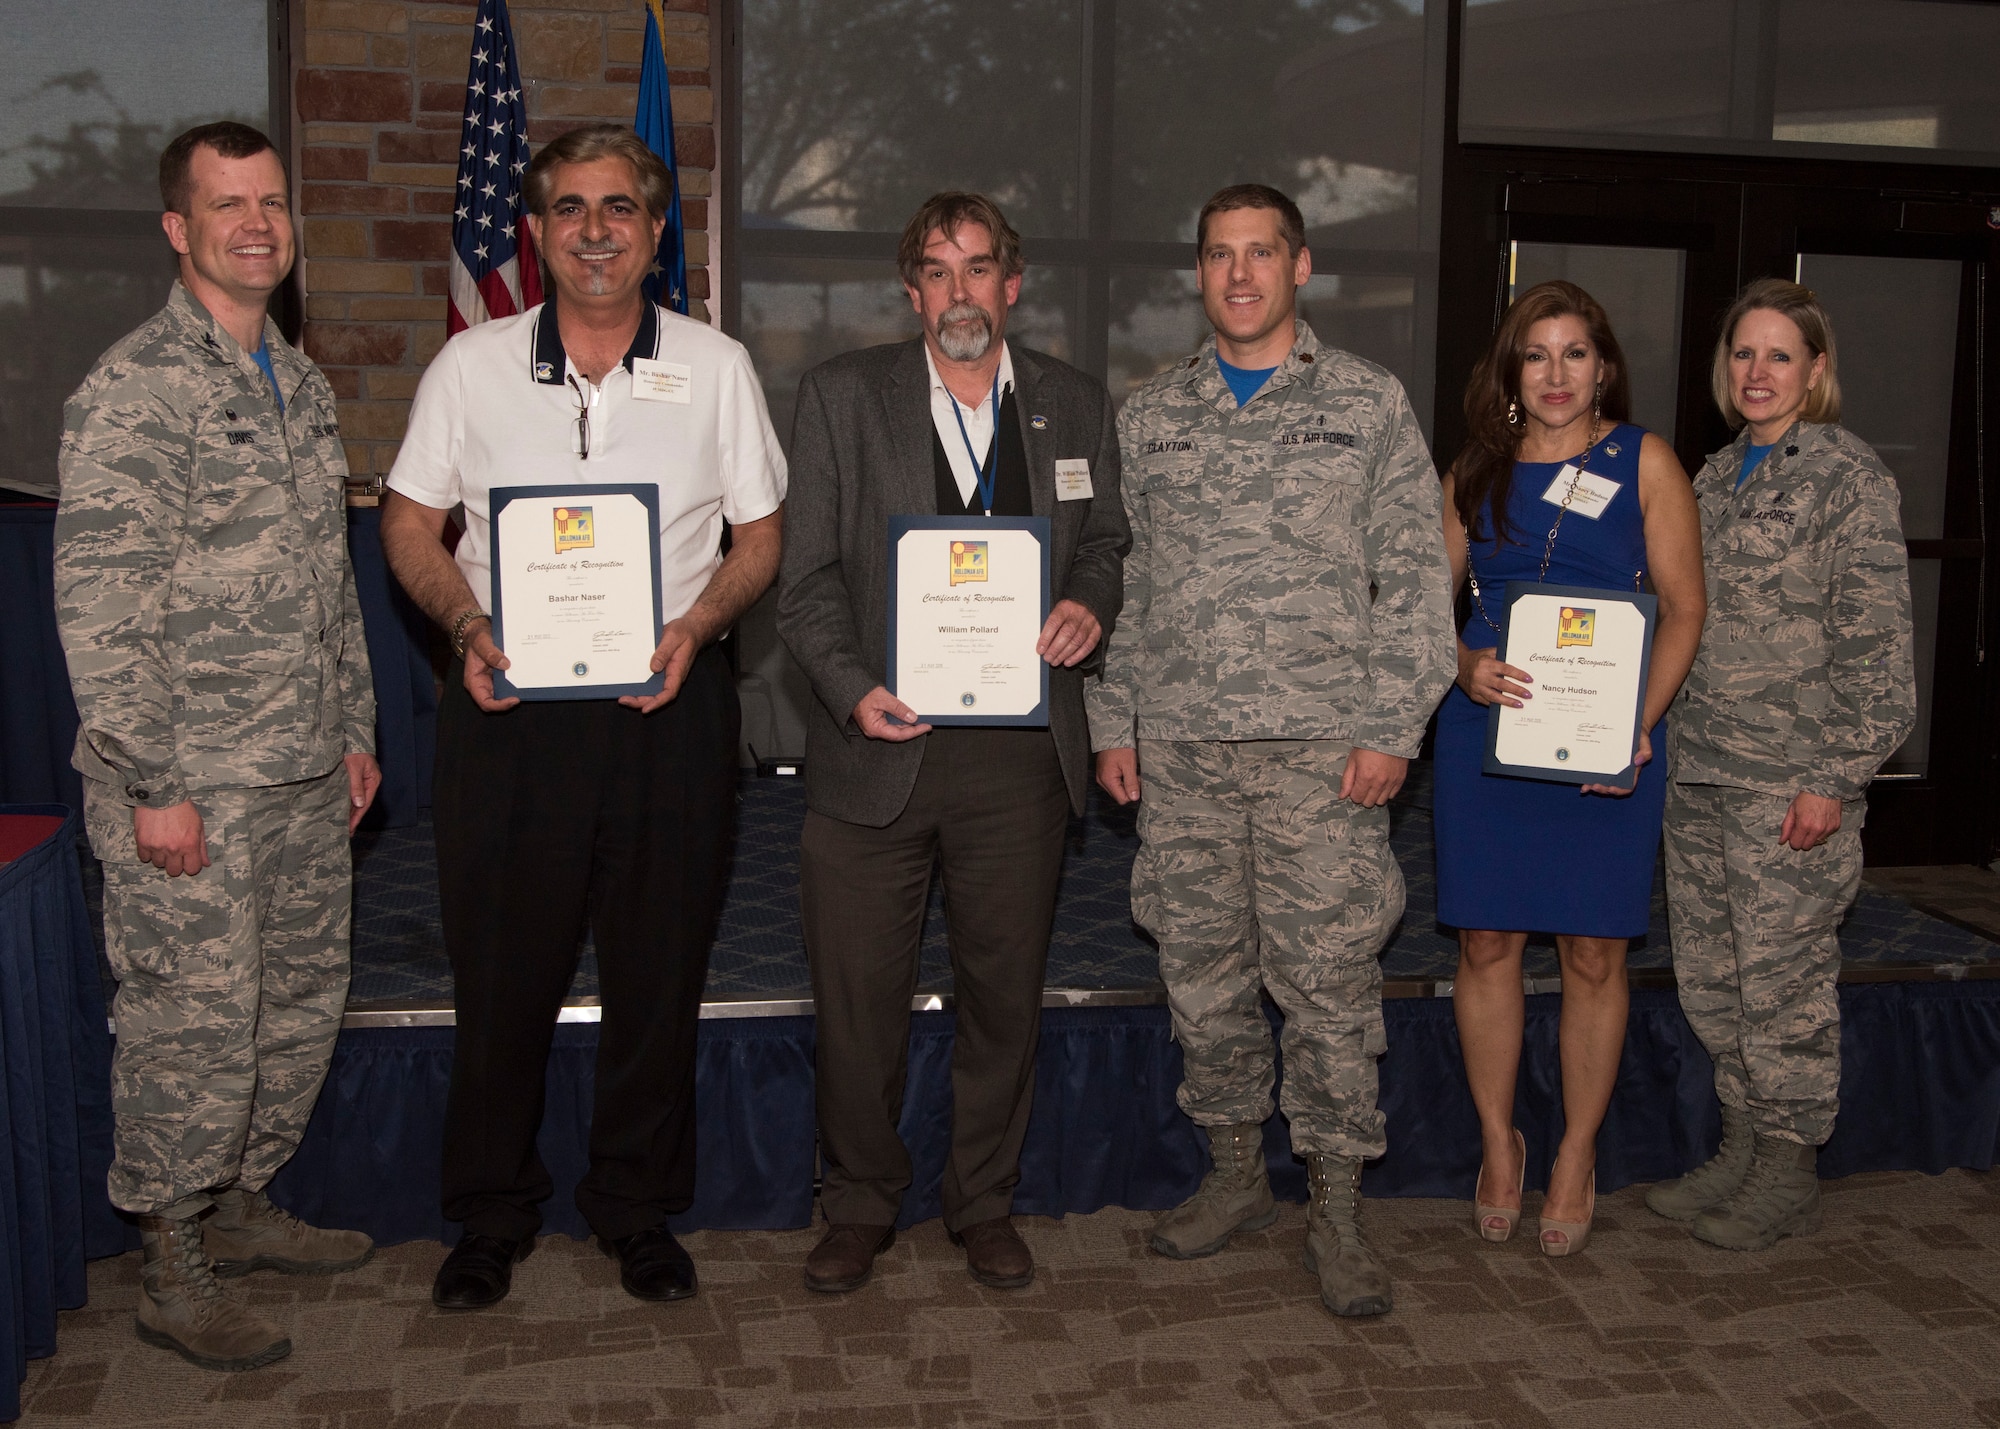 Commanders and honorary commanders from the 49th Medical Group pose for a photo, May 31, 2019, on Holloman Air Force Base, N.M. The honorary commander program establishes and maintains personal relationships with local civic leaders, and aids in increasing public awareness of the missions, policies and programs of the Department of Defense and United States Air Force. (U.S. Air Force photo by Staff Sgt. BreeAnn Sachs)